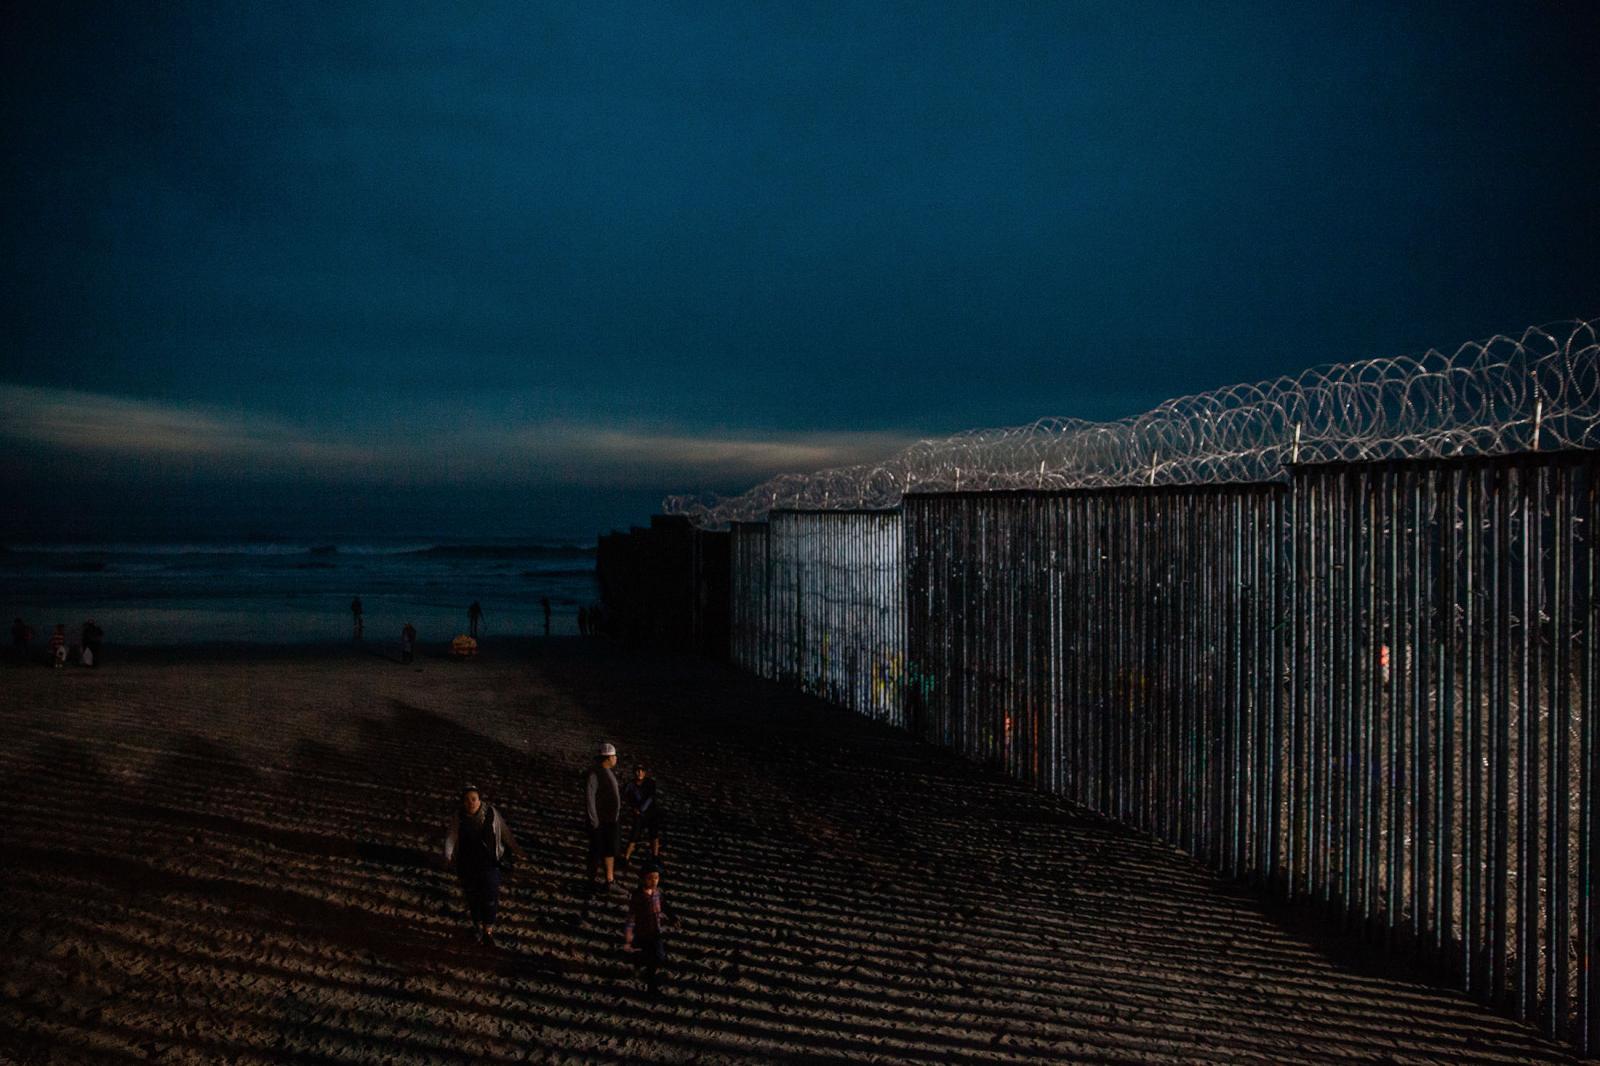 Playas de Tijuana on December 9, 2018. At night the beach is lit up with lights from the U.S. side to help Border Patrol find people trying to cross illegally.